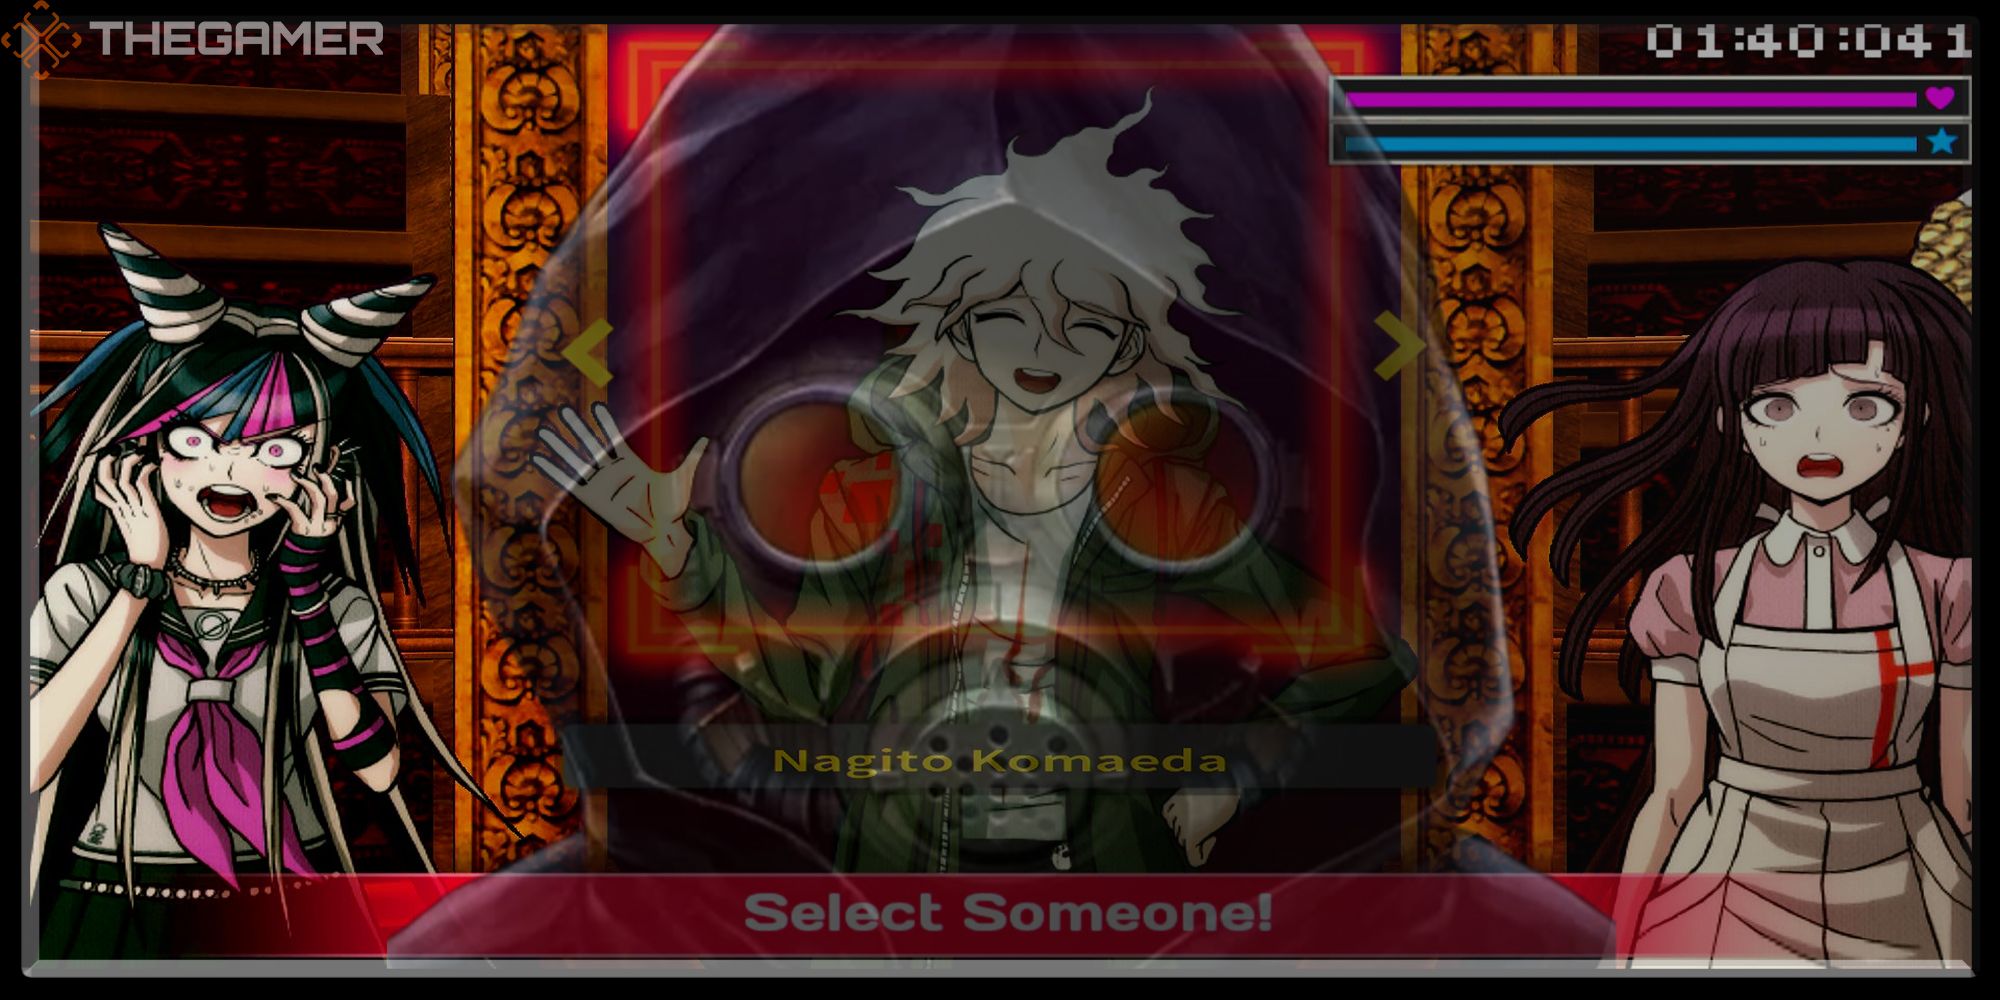 Zero observes Danganronpa 2 gameplay on a TV monitor. Feature Image for TheGamer.